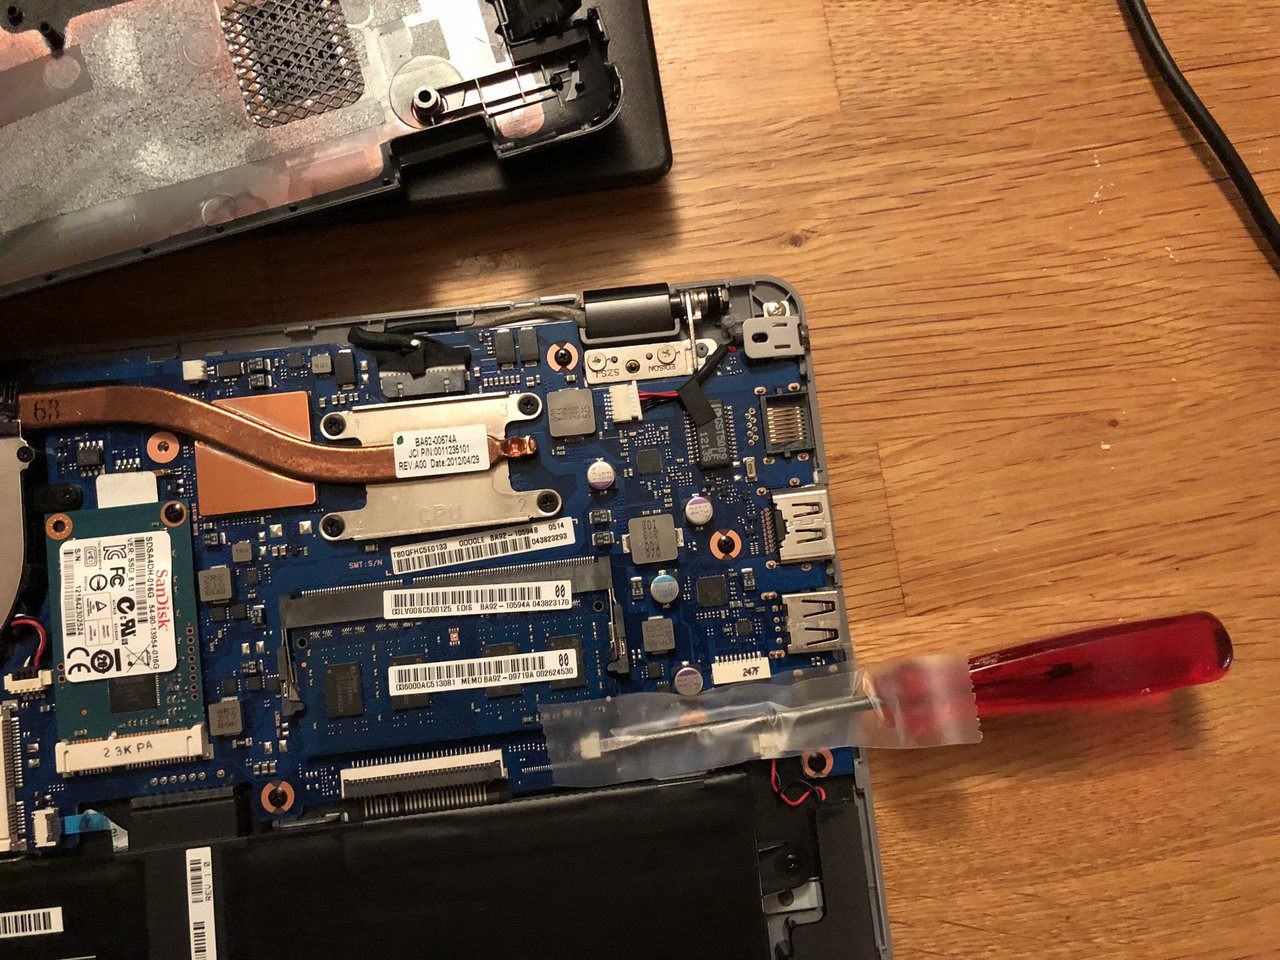 A red screwdriver shorting a jumper on the motherboard